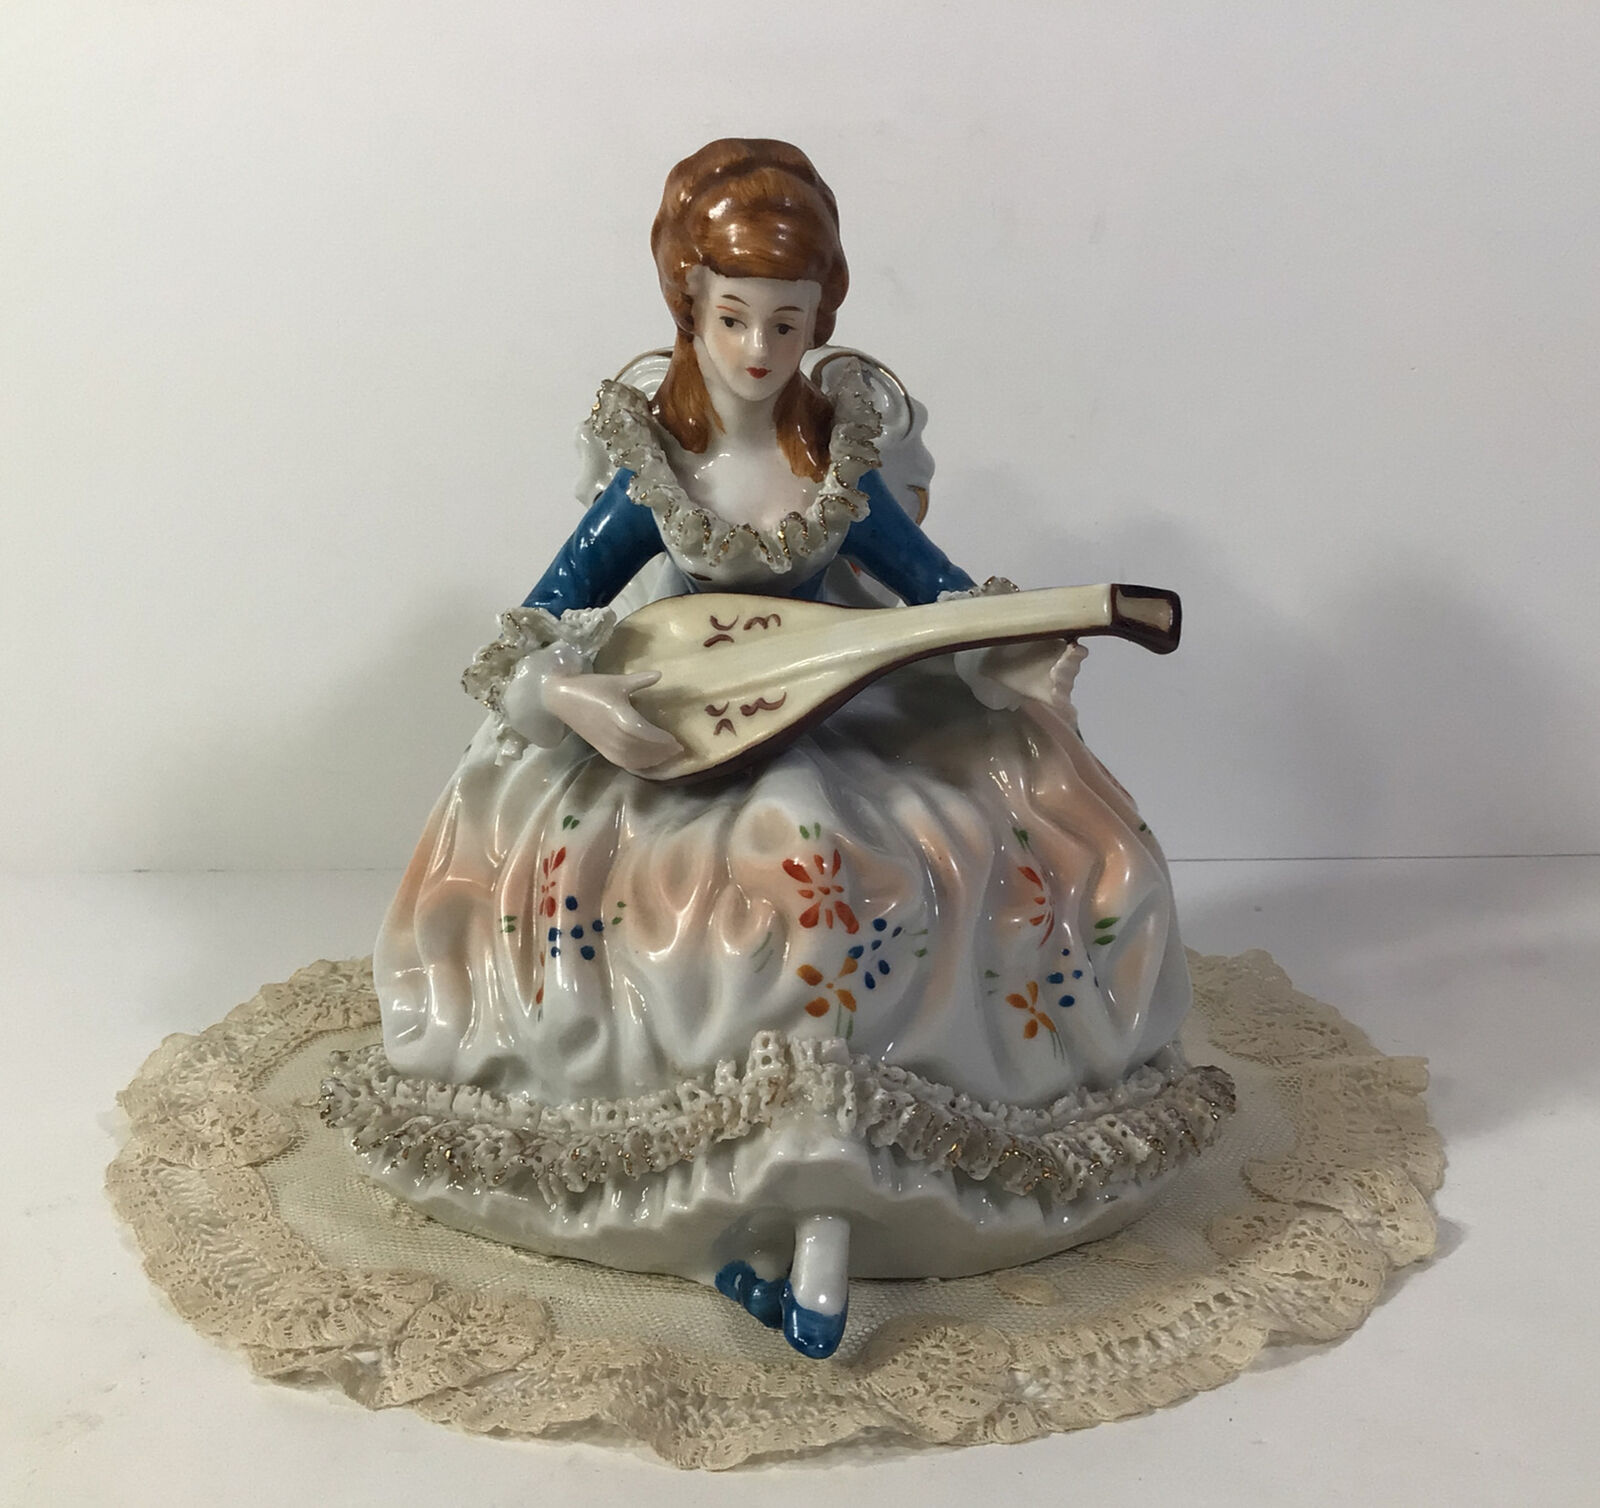 Vintage Porcelain Victorian Woman Figurine With Banjo~Dresden Style Ruffled Lace